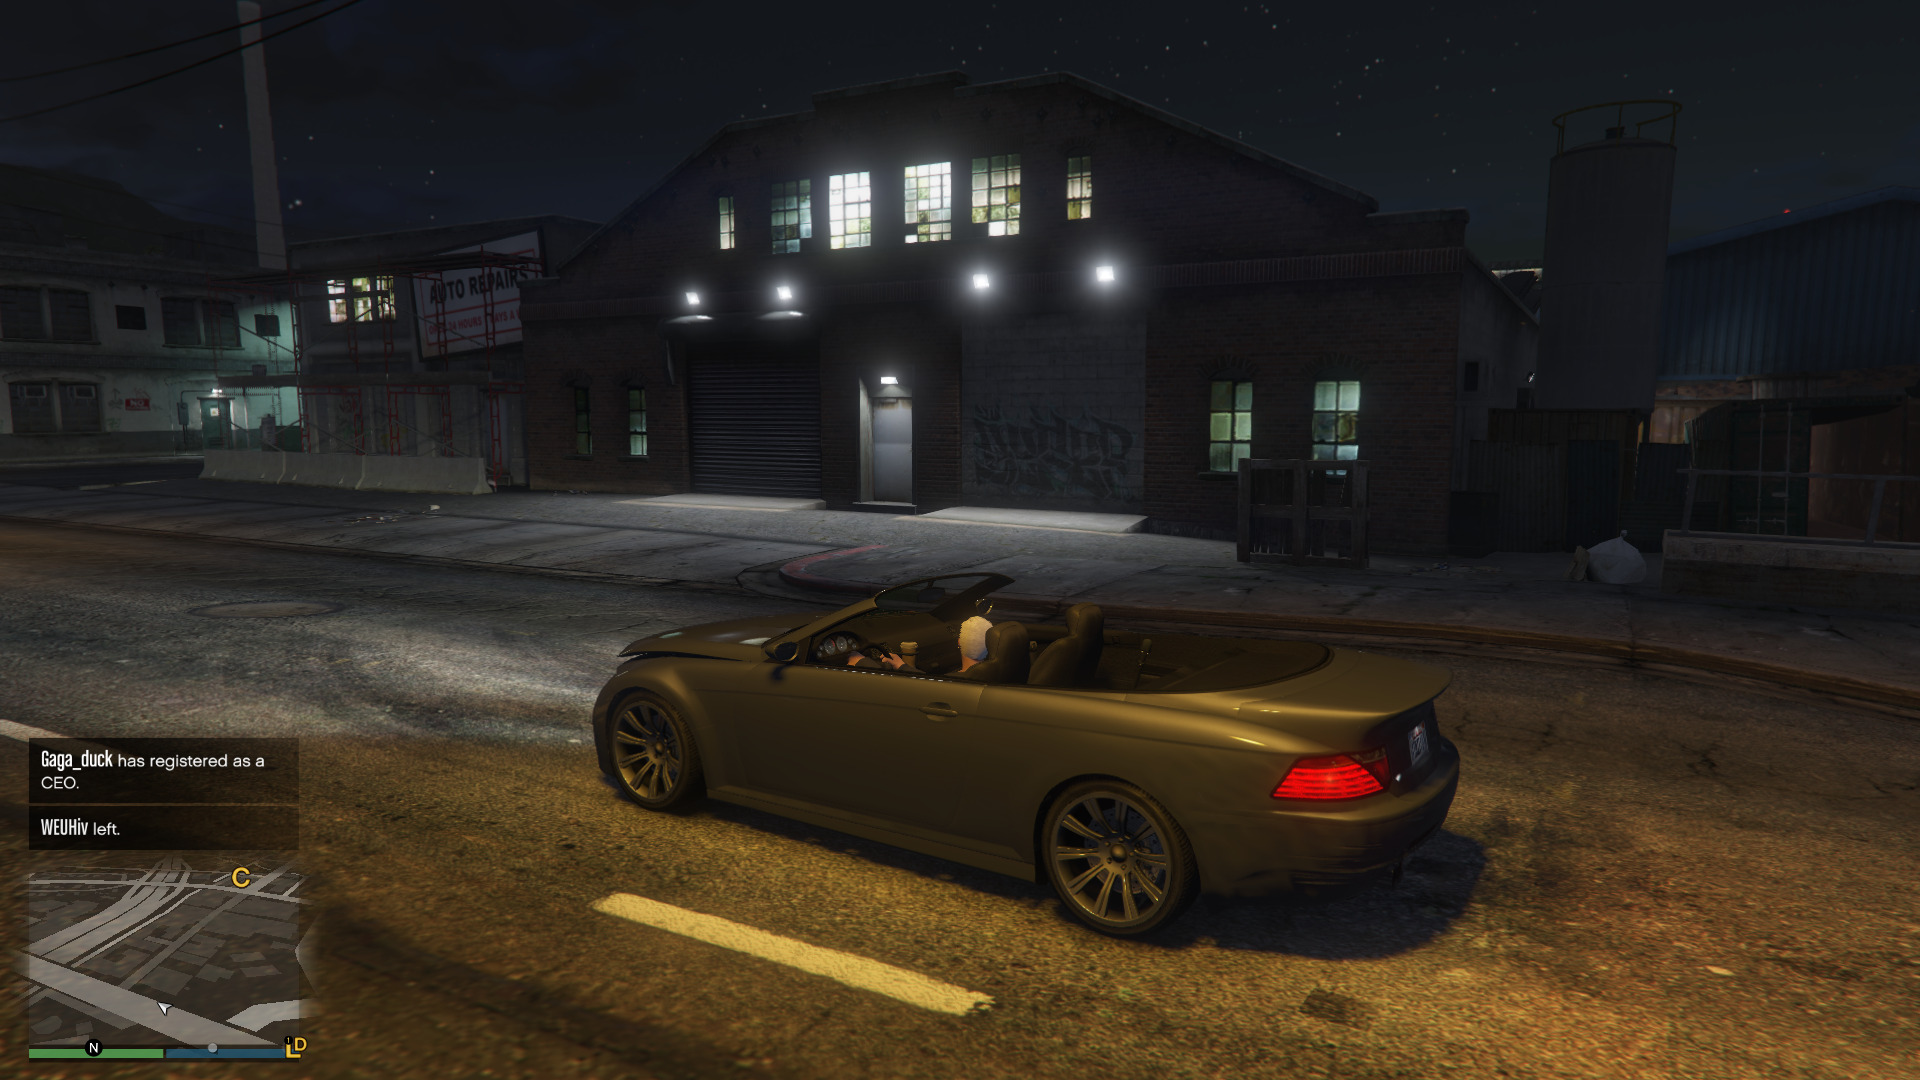 You can buy the La Mesa Clubhouse in GTA V for $449,000